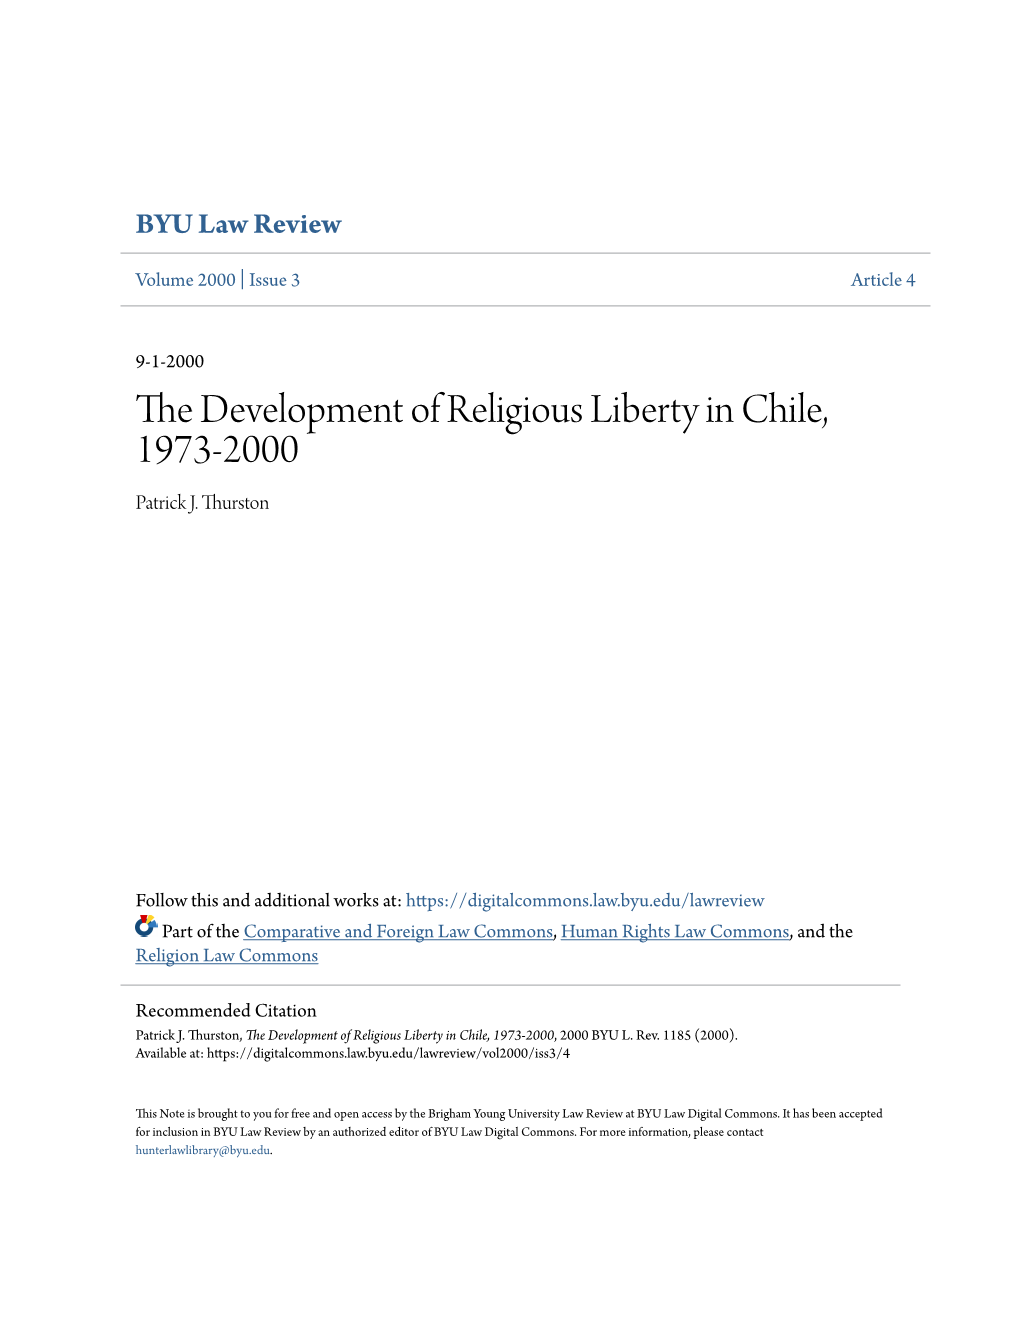 The Development of Religious Liberty in Chile, 1973-2000, 2000 BYU L